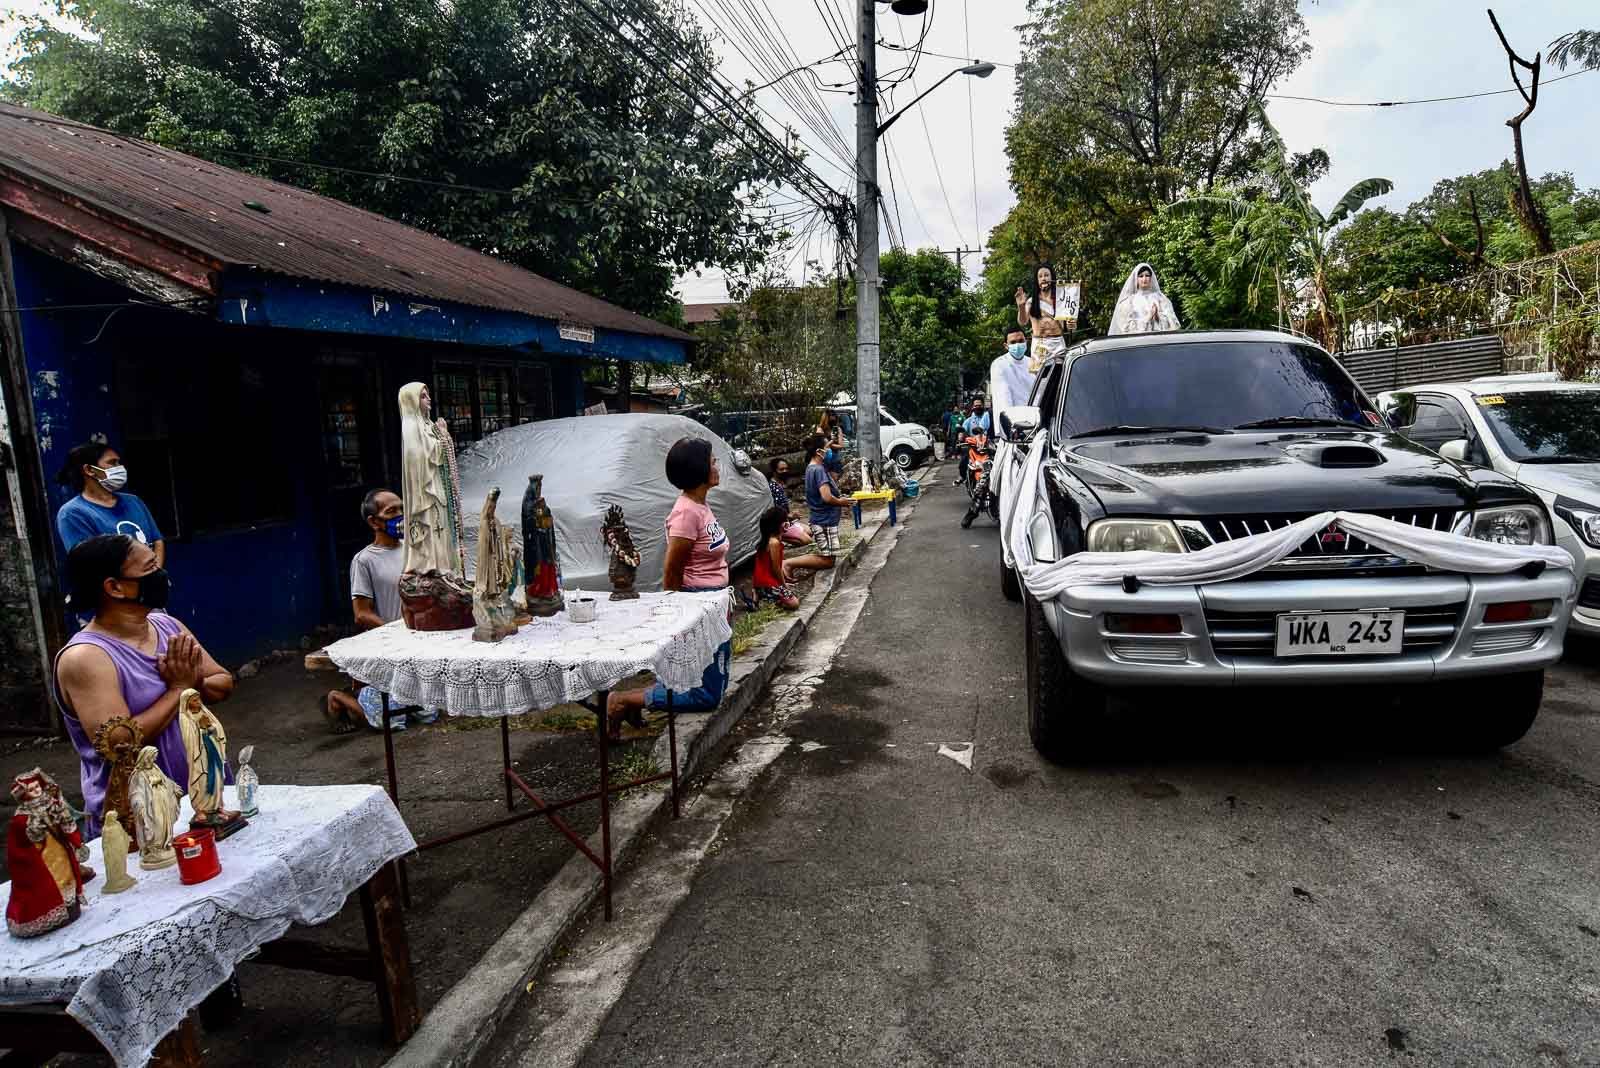 EASTER SUNDAY. A drive-by procession is held around the residential areas of the University of the Philippines in Diliman on Easter Sunday, April 12, 2020. Photo by Angie de Silva/Rappler 